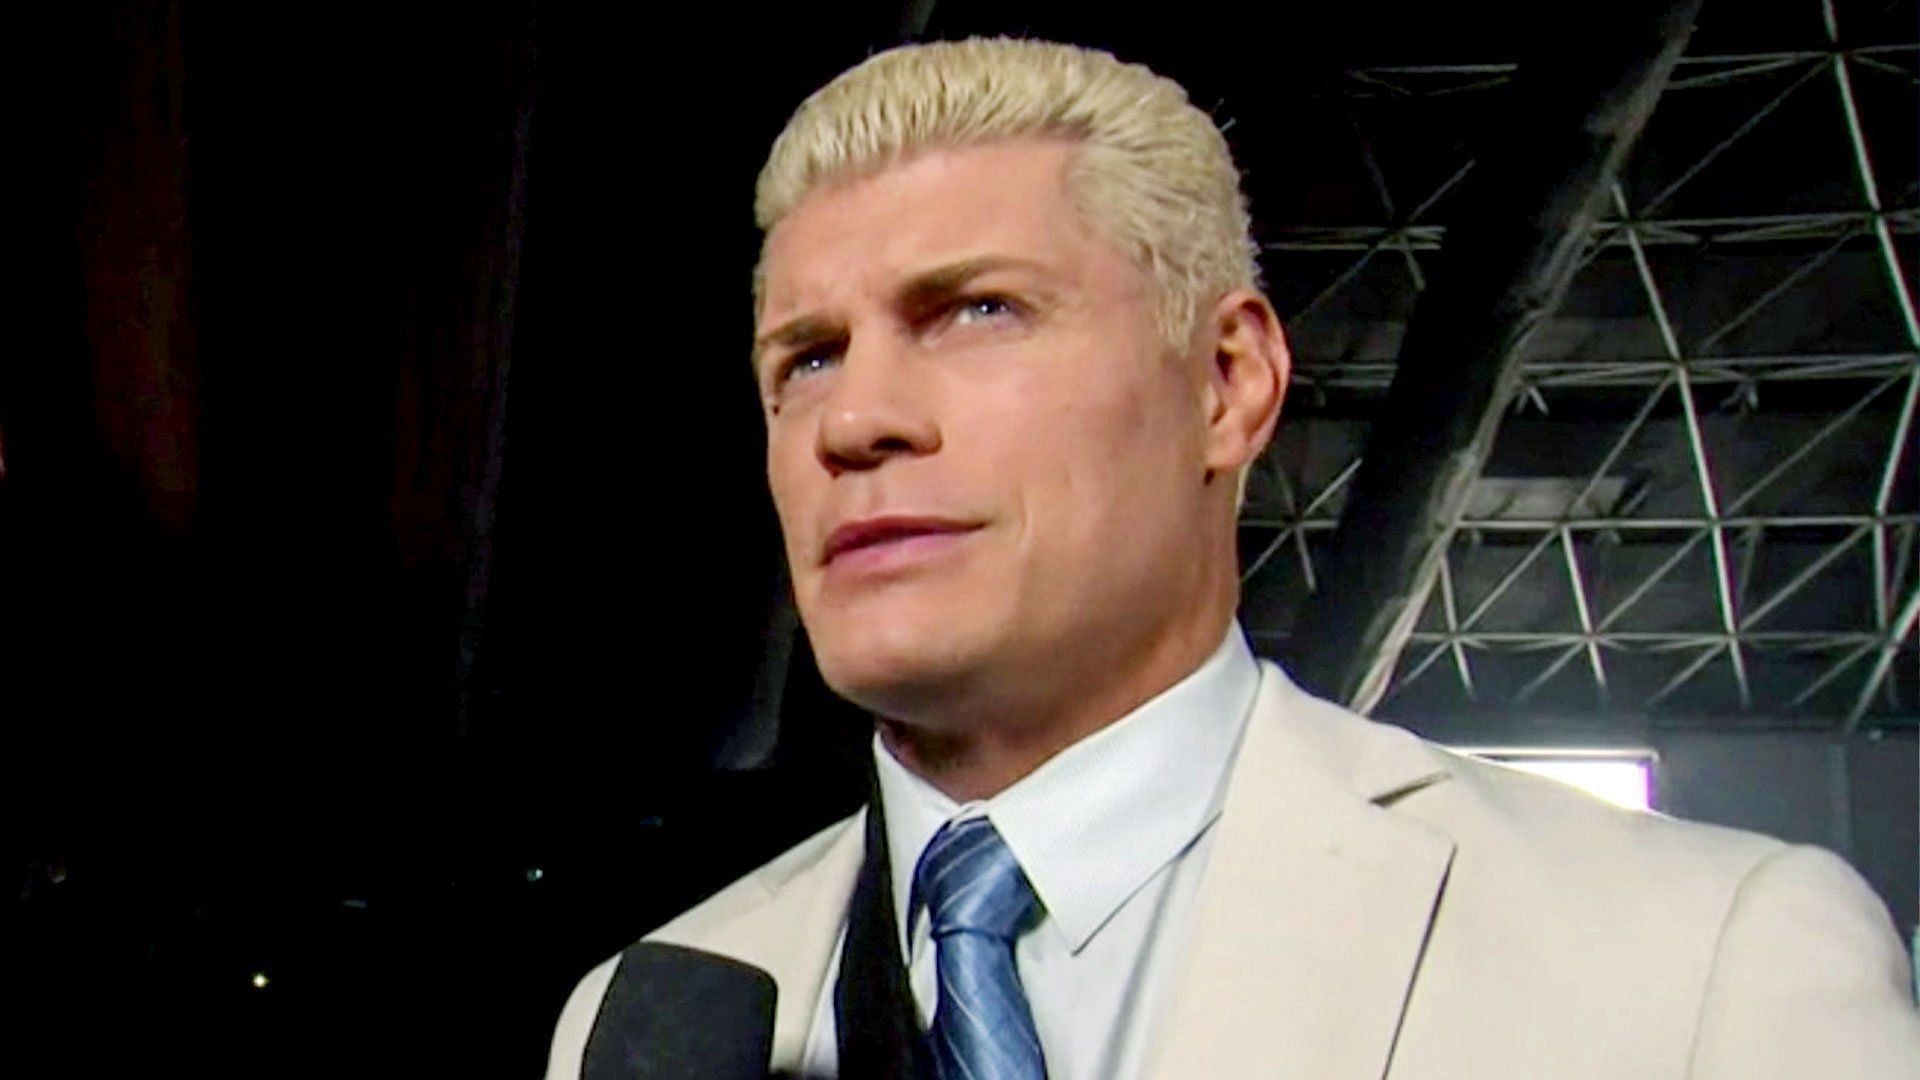 Cody Rhodes was the first AEW wrestler to go back to WWE.